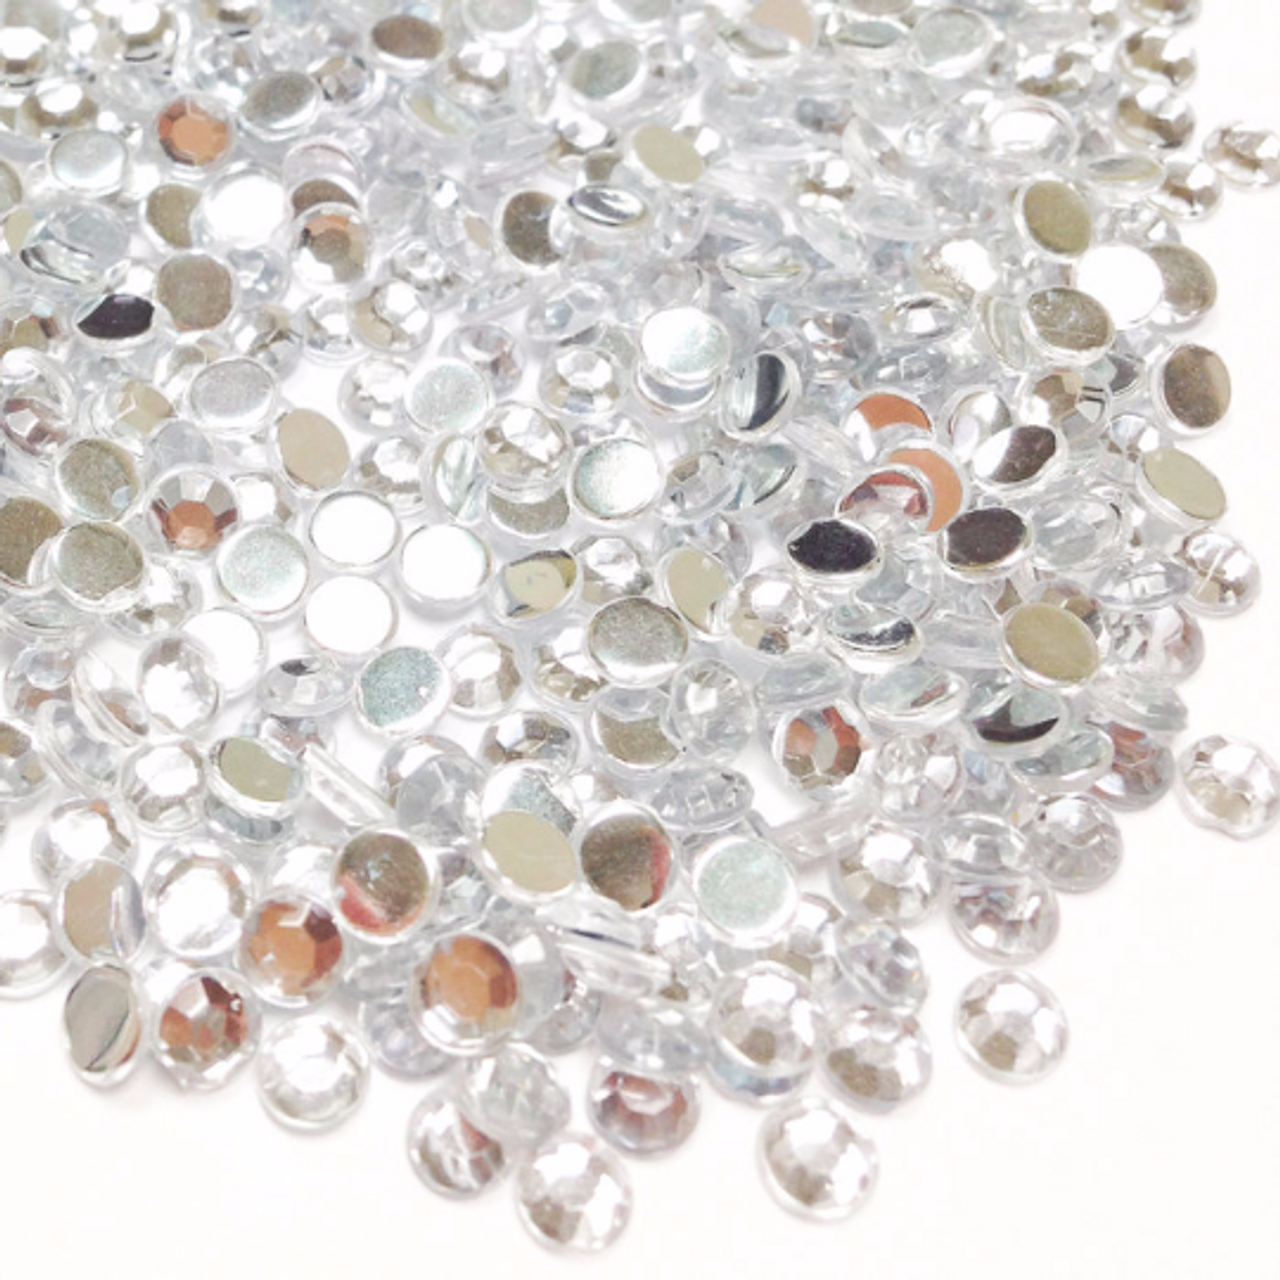 5mm SS20 Clear Wholesale Flat Back Rhinestones - Pack of 10,000 Pieces - CB  Flowers & Crafts